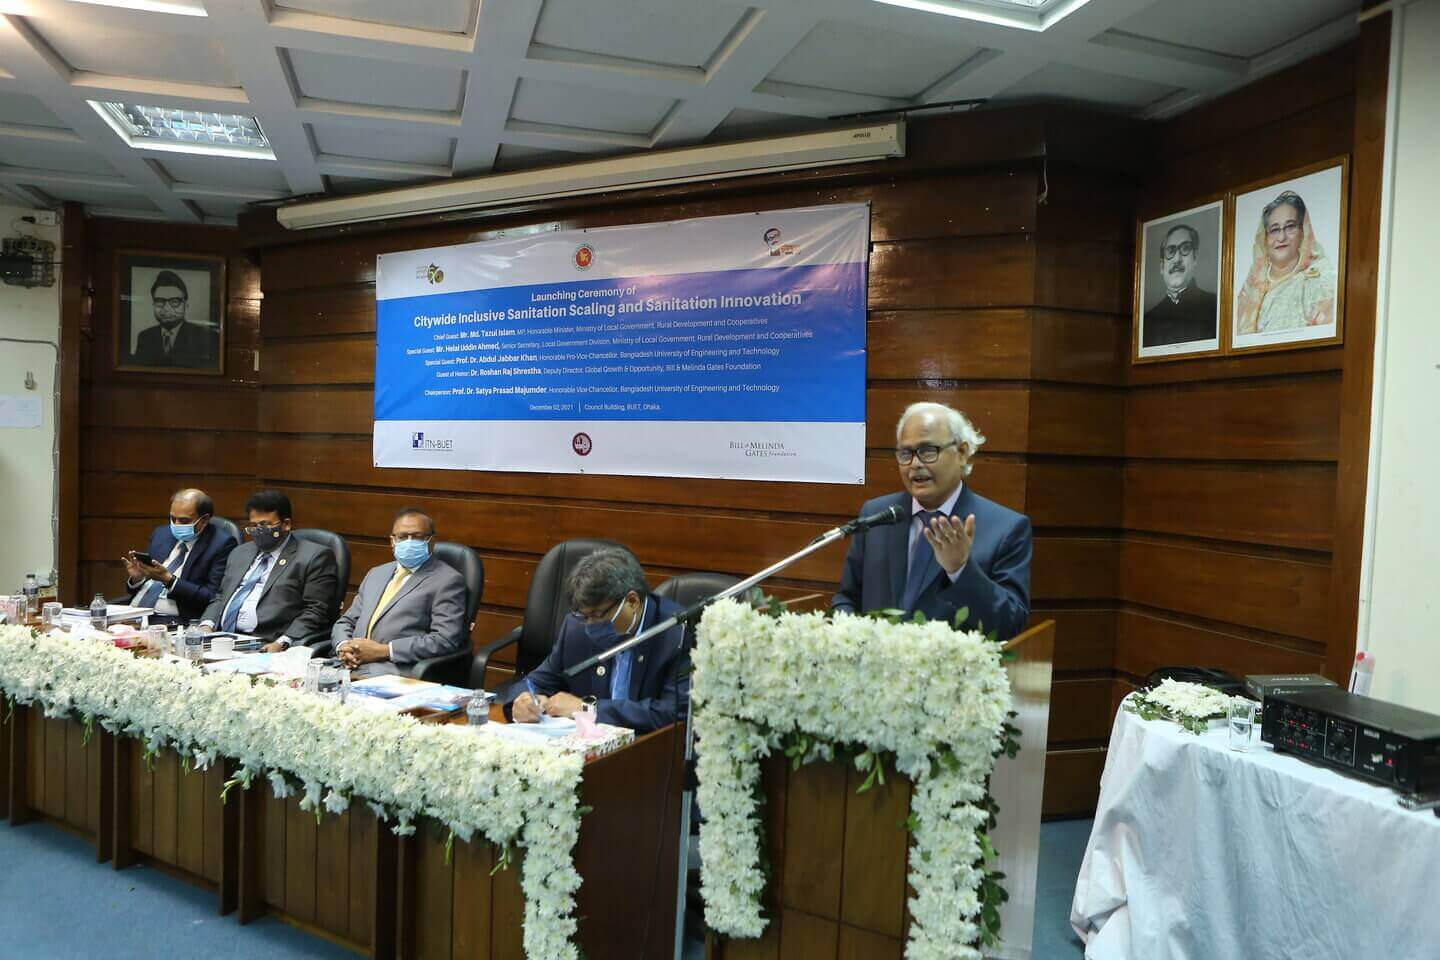 ITN-BUET launched a new capacity building project on scaling City wide Inclusive Sanitation